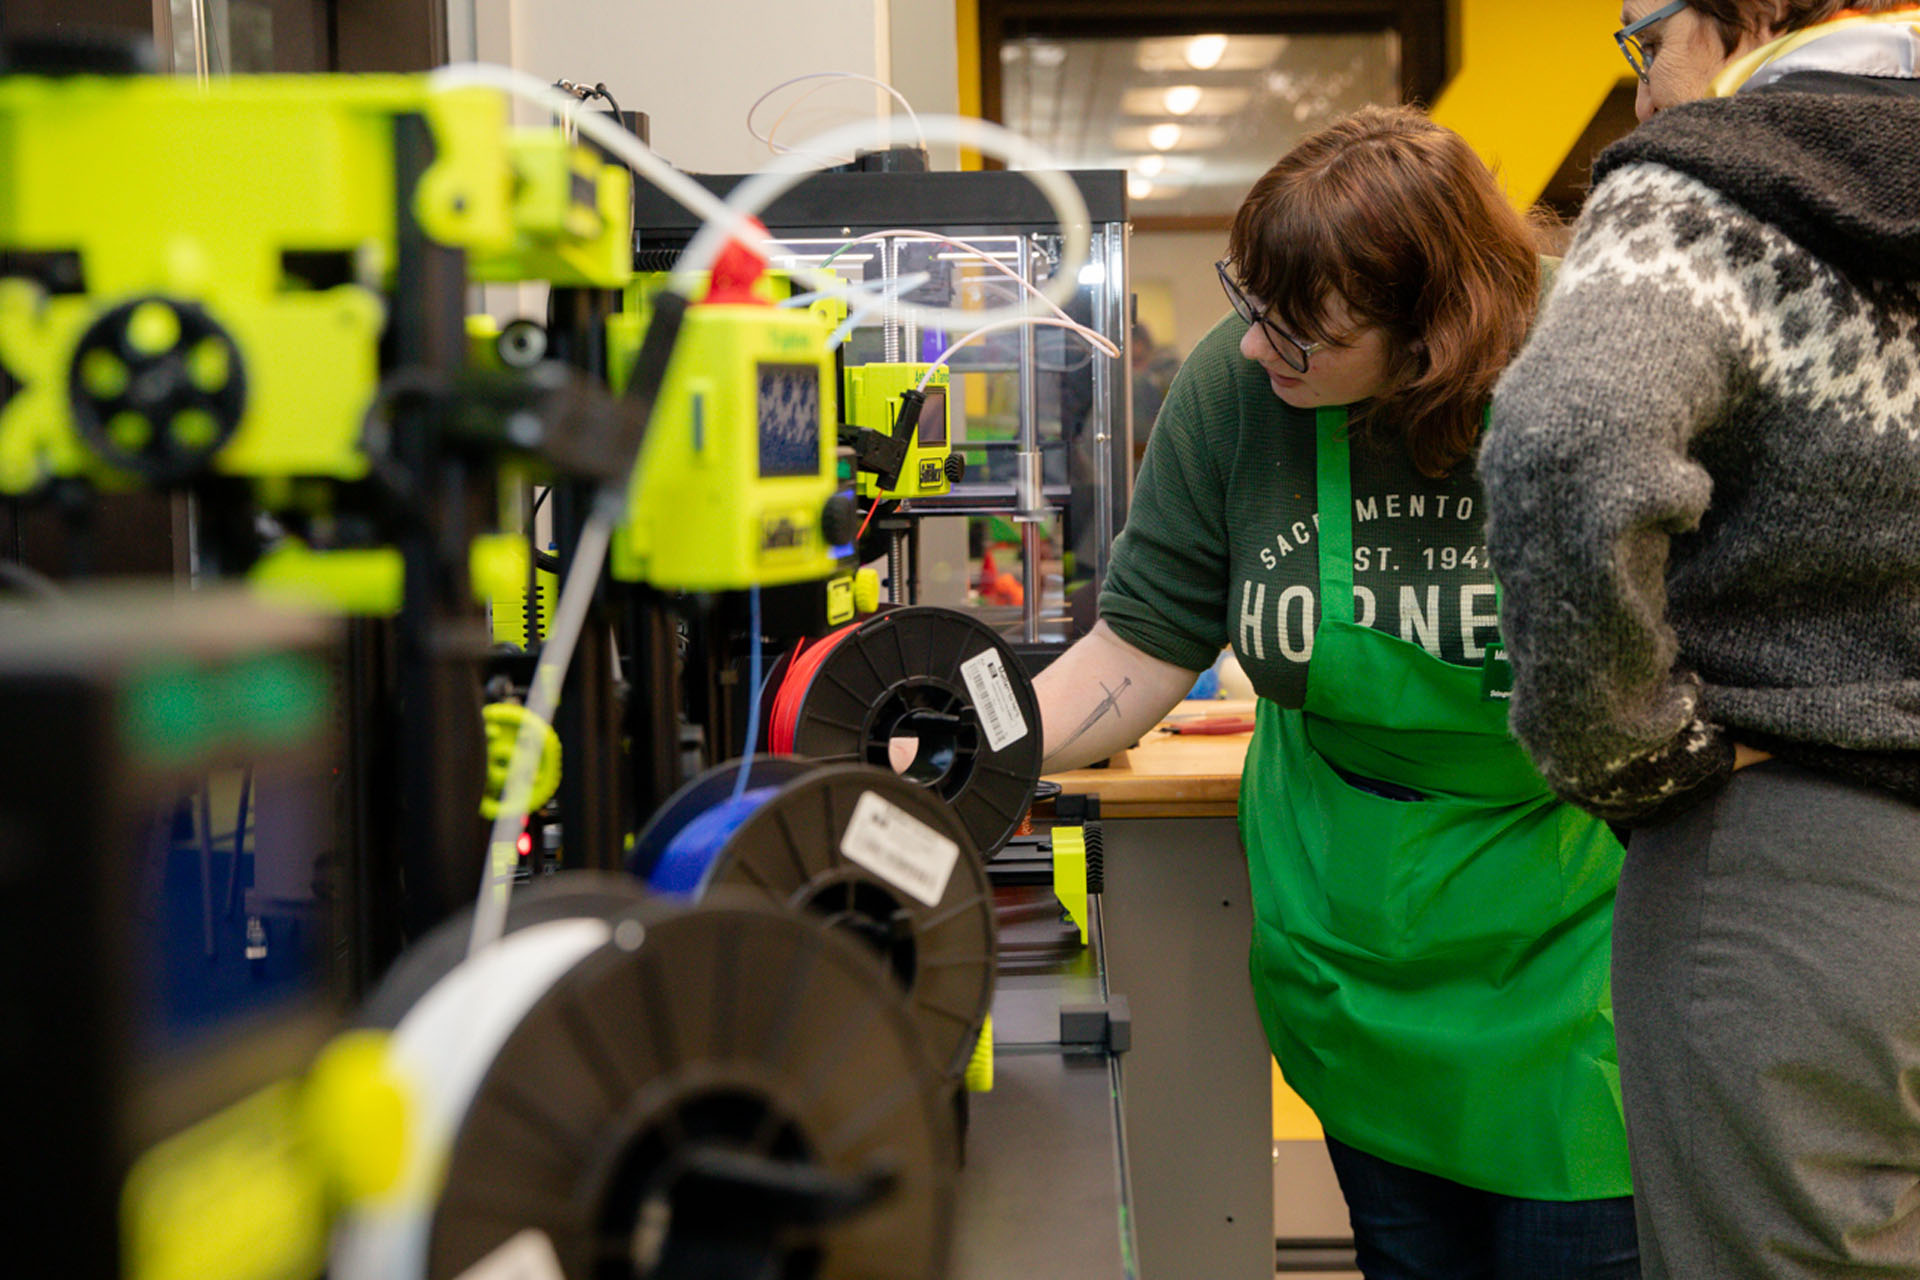 3D printing, ‘career visions’ courses highlight Sac State’s Summer